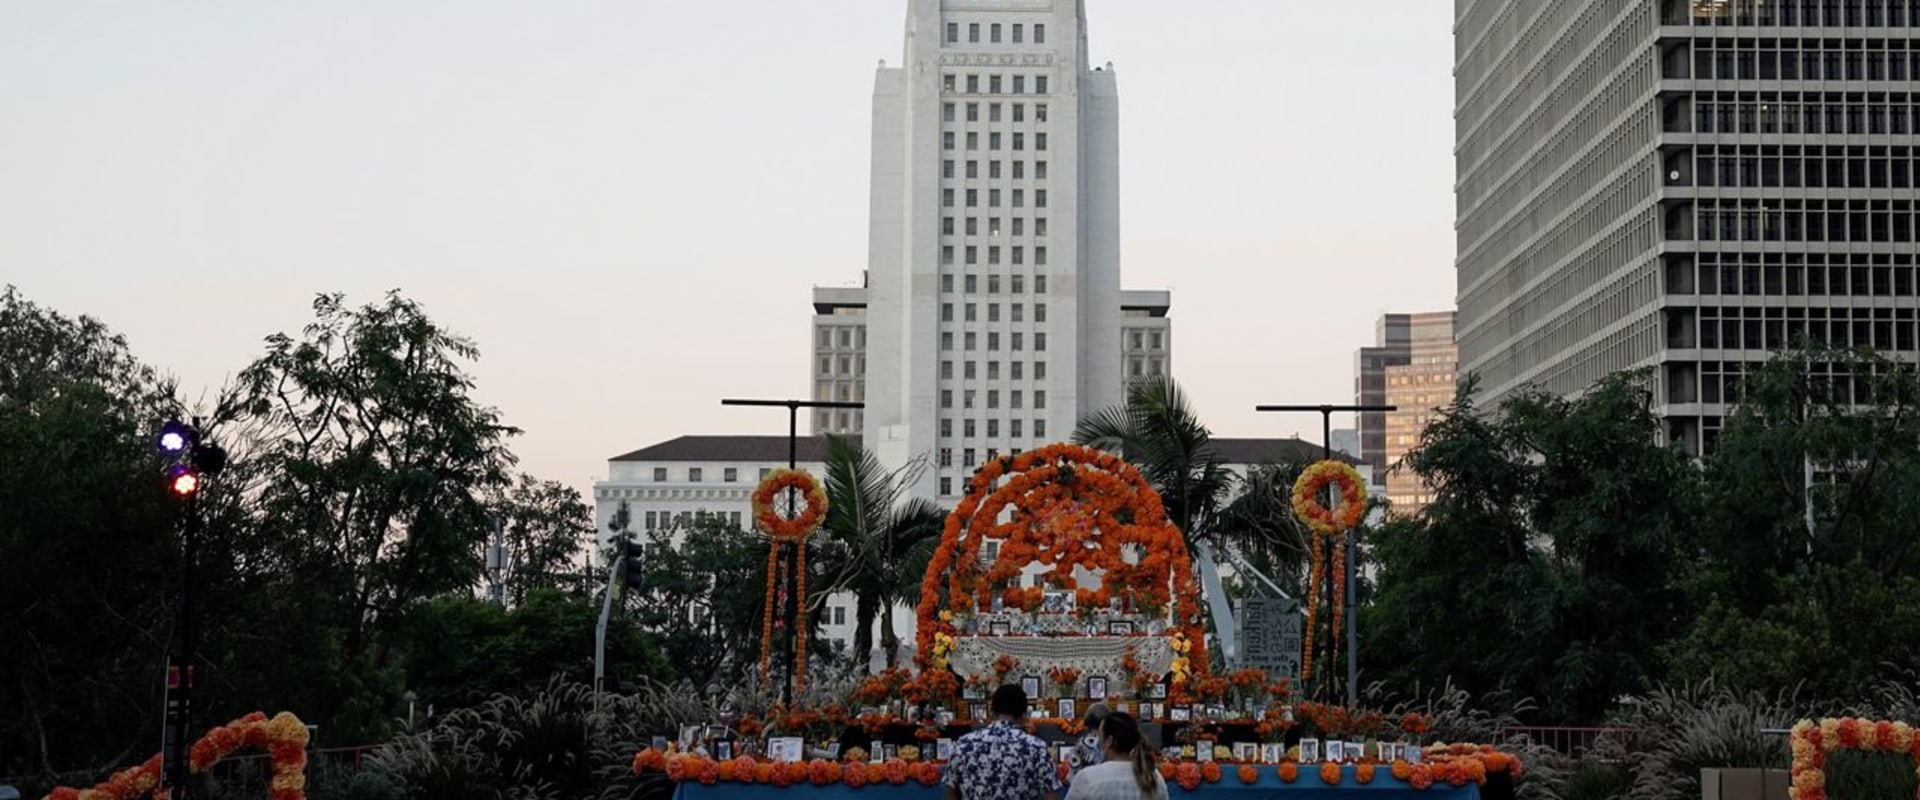 Embracing Diversity: Celebrating Cultural Differences in Los Angeles County, CA